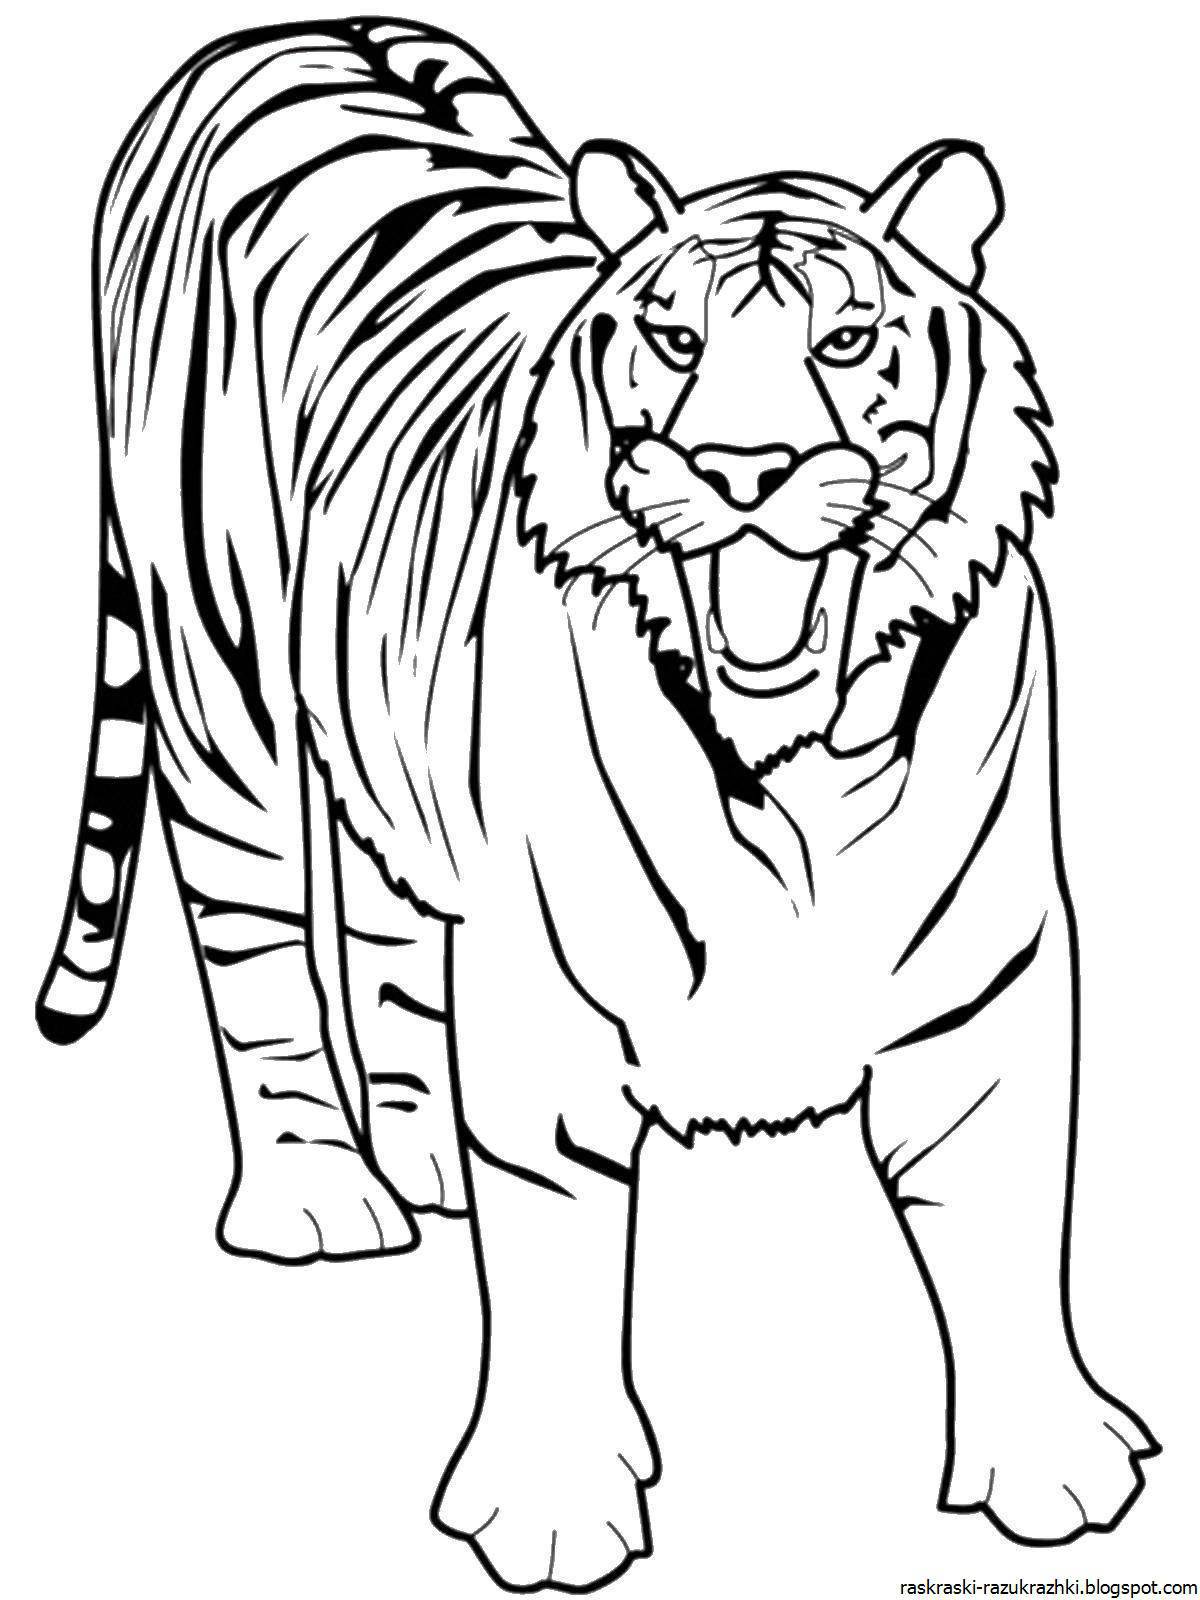 Radiant Siberian tiger coloring page